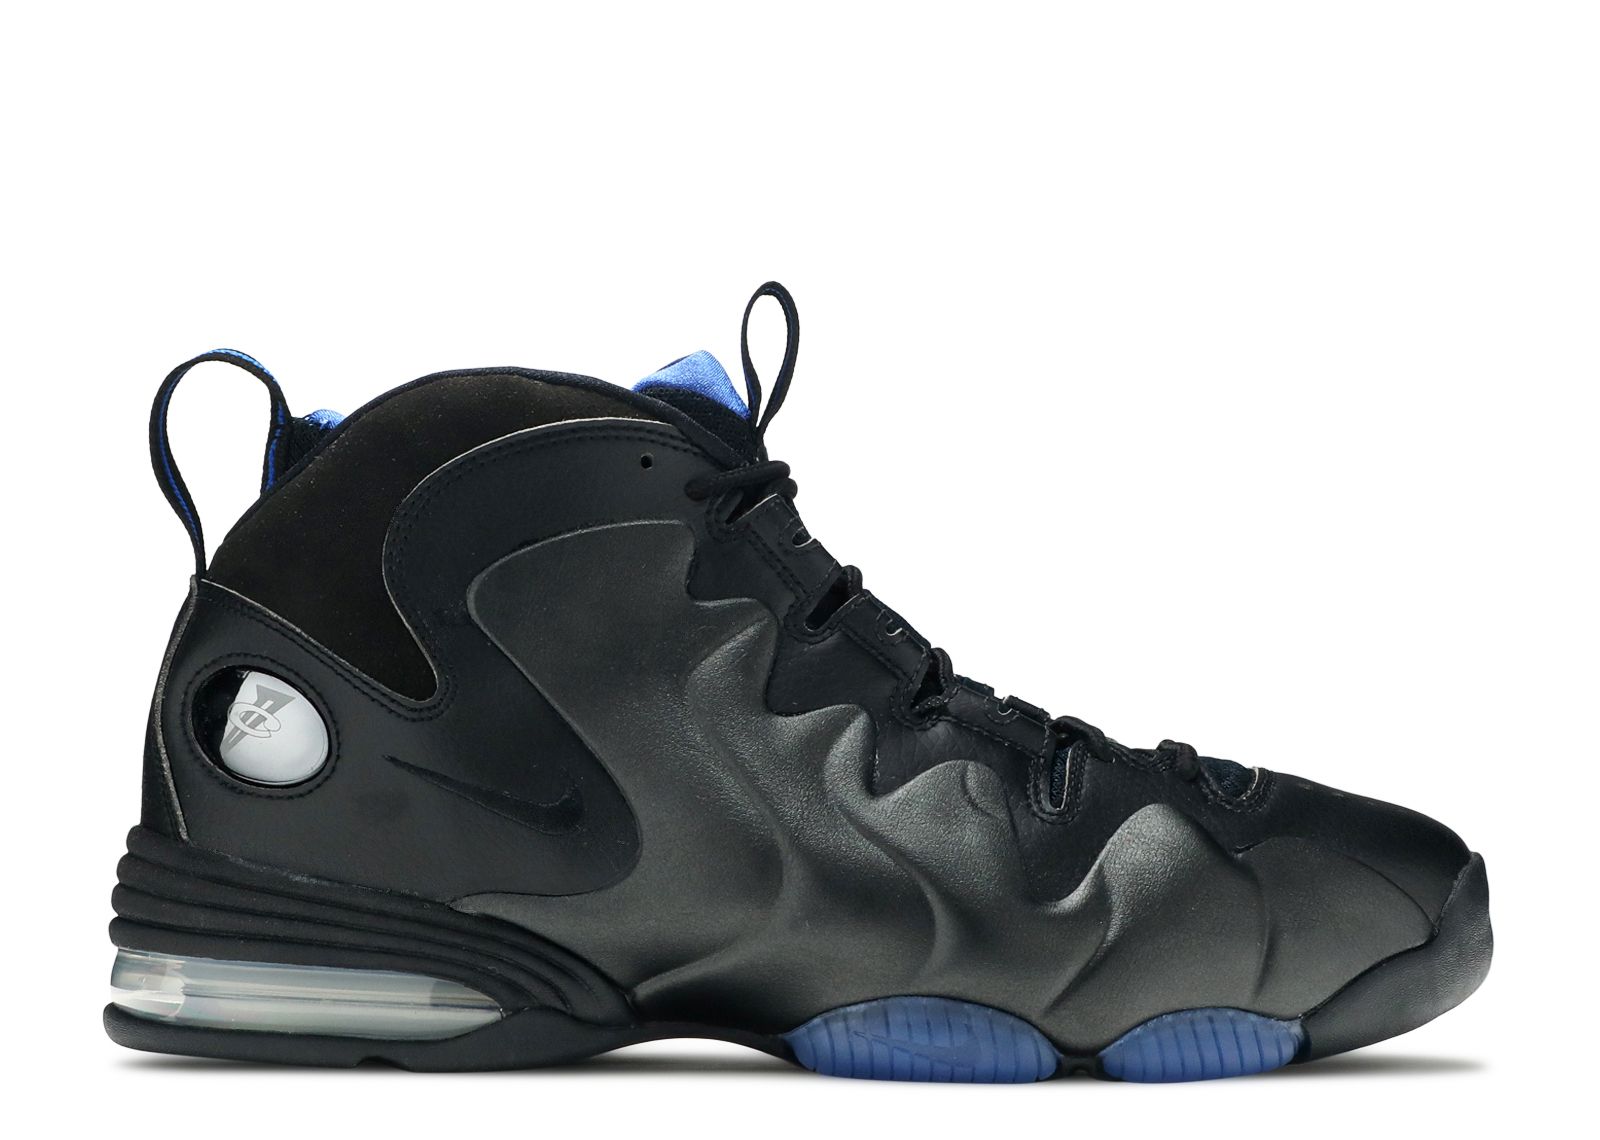 Buy > penny nike shoes > in stock